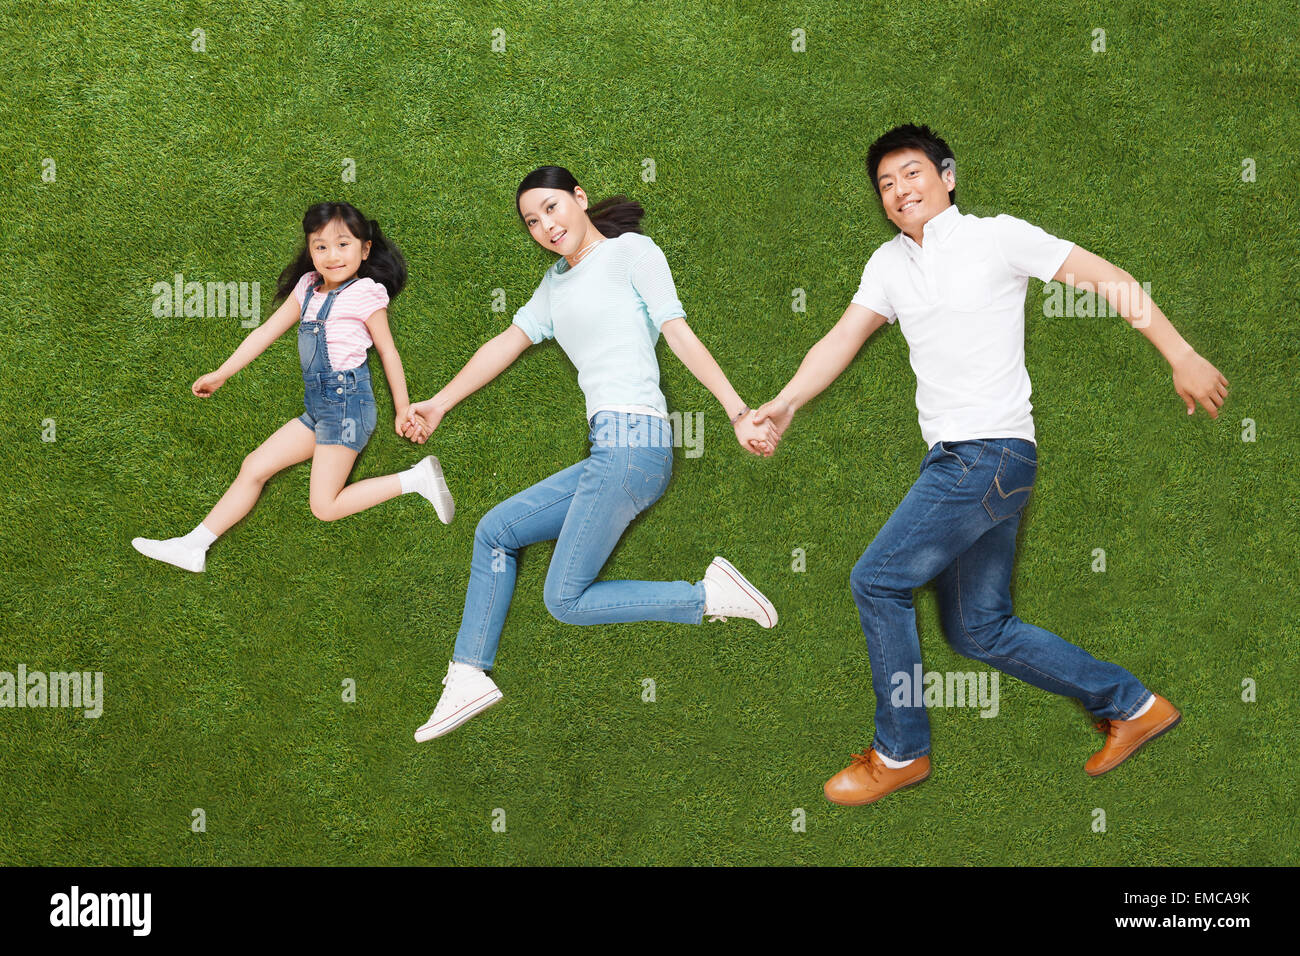 A family of three lying on the grass do running posture Stock Photo